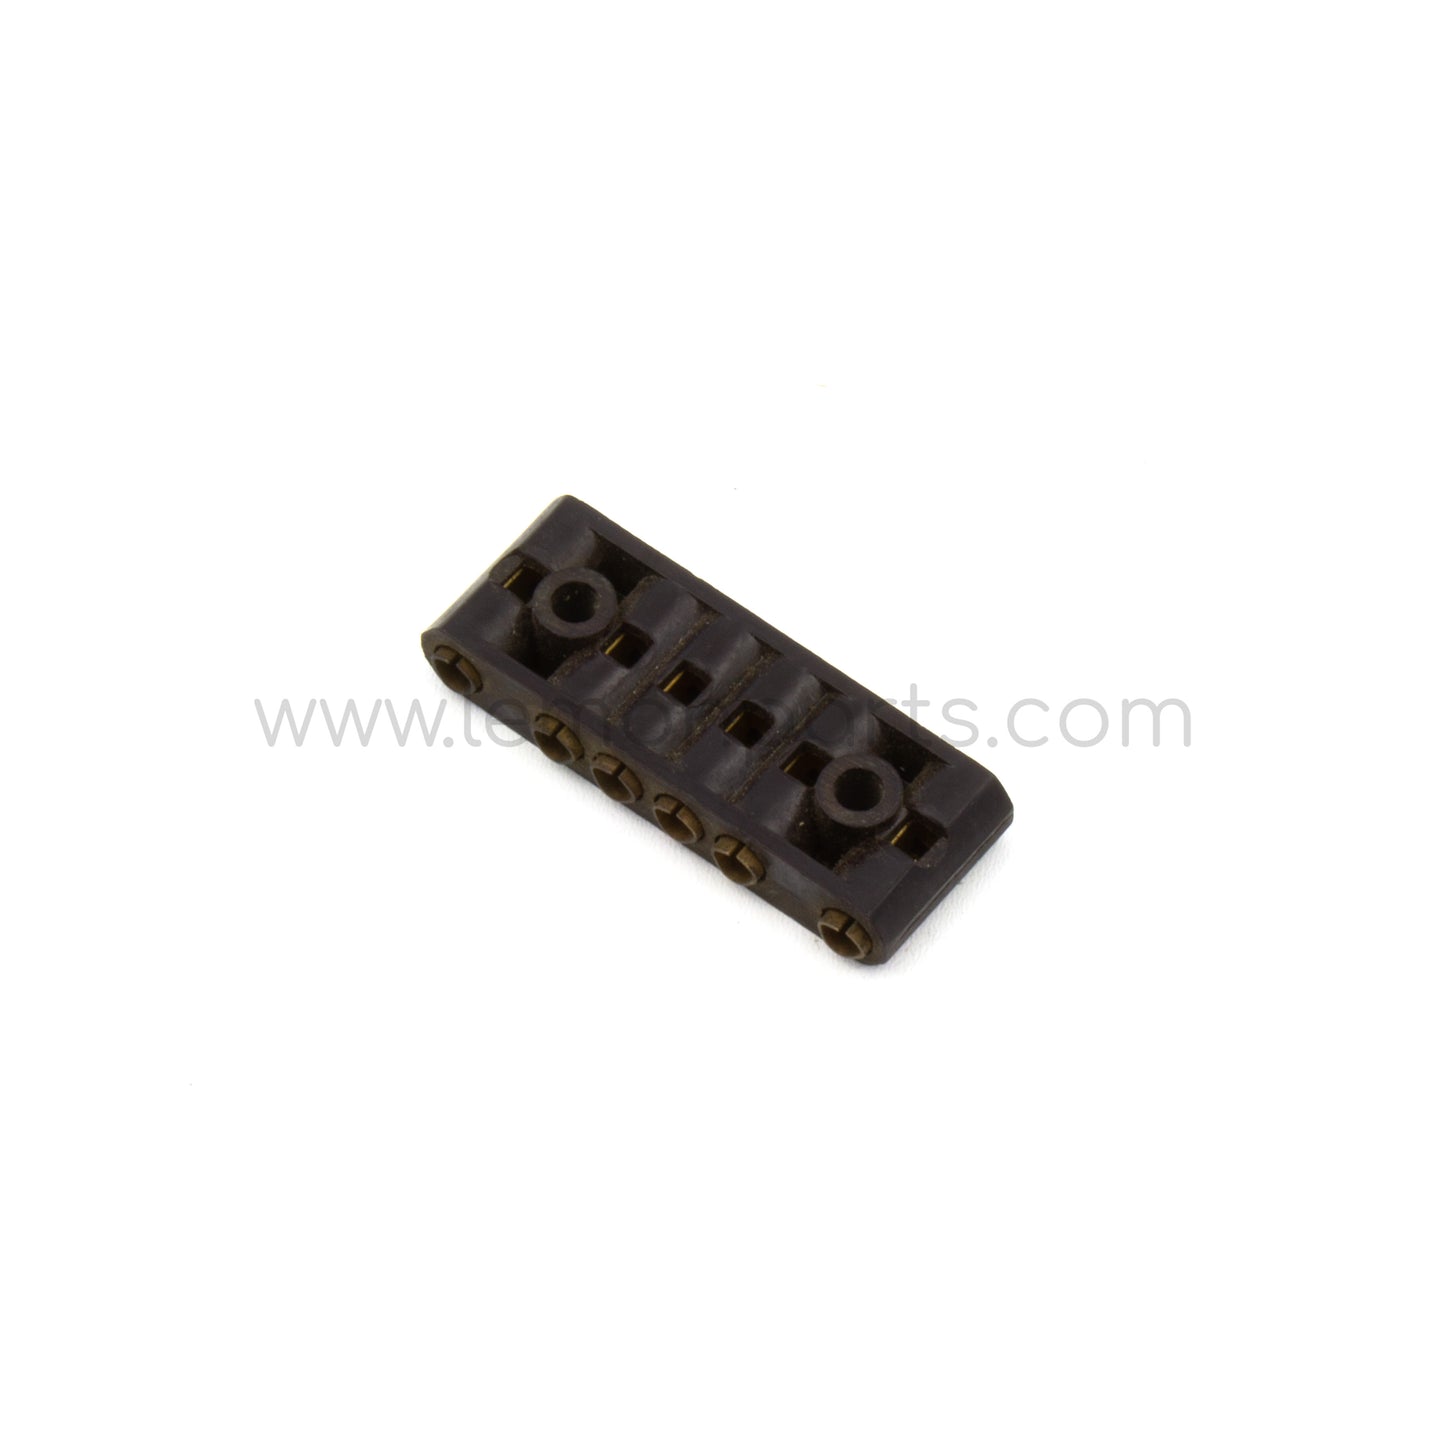 Wire connector block for steering column for Ferrari 250 / 275 / 330